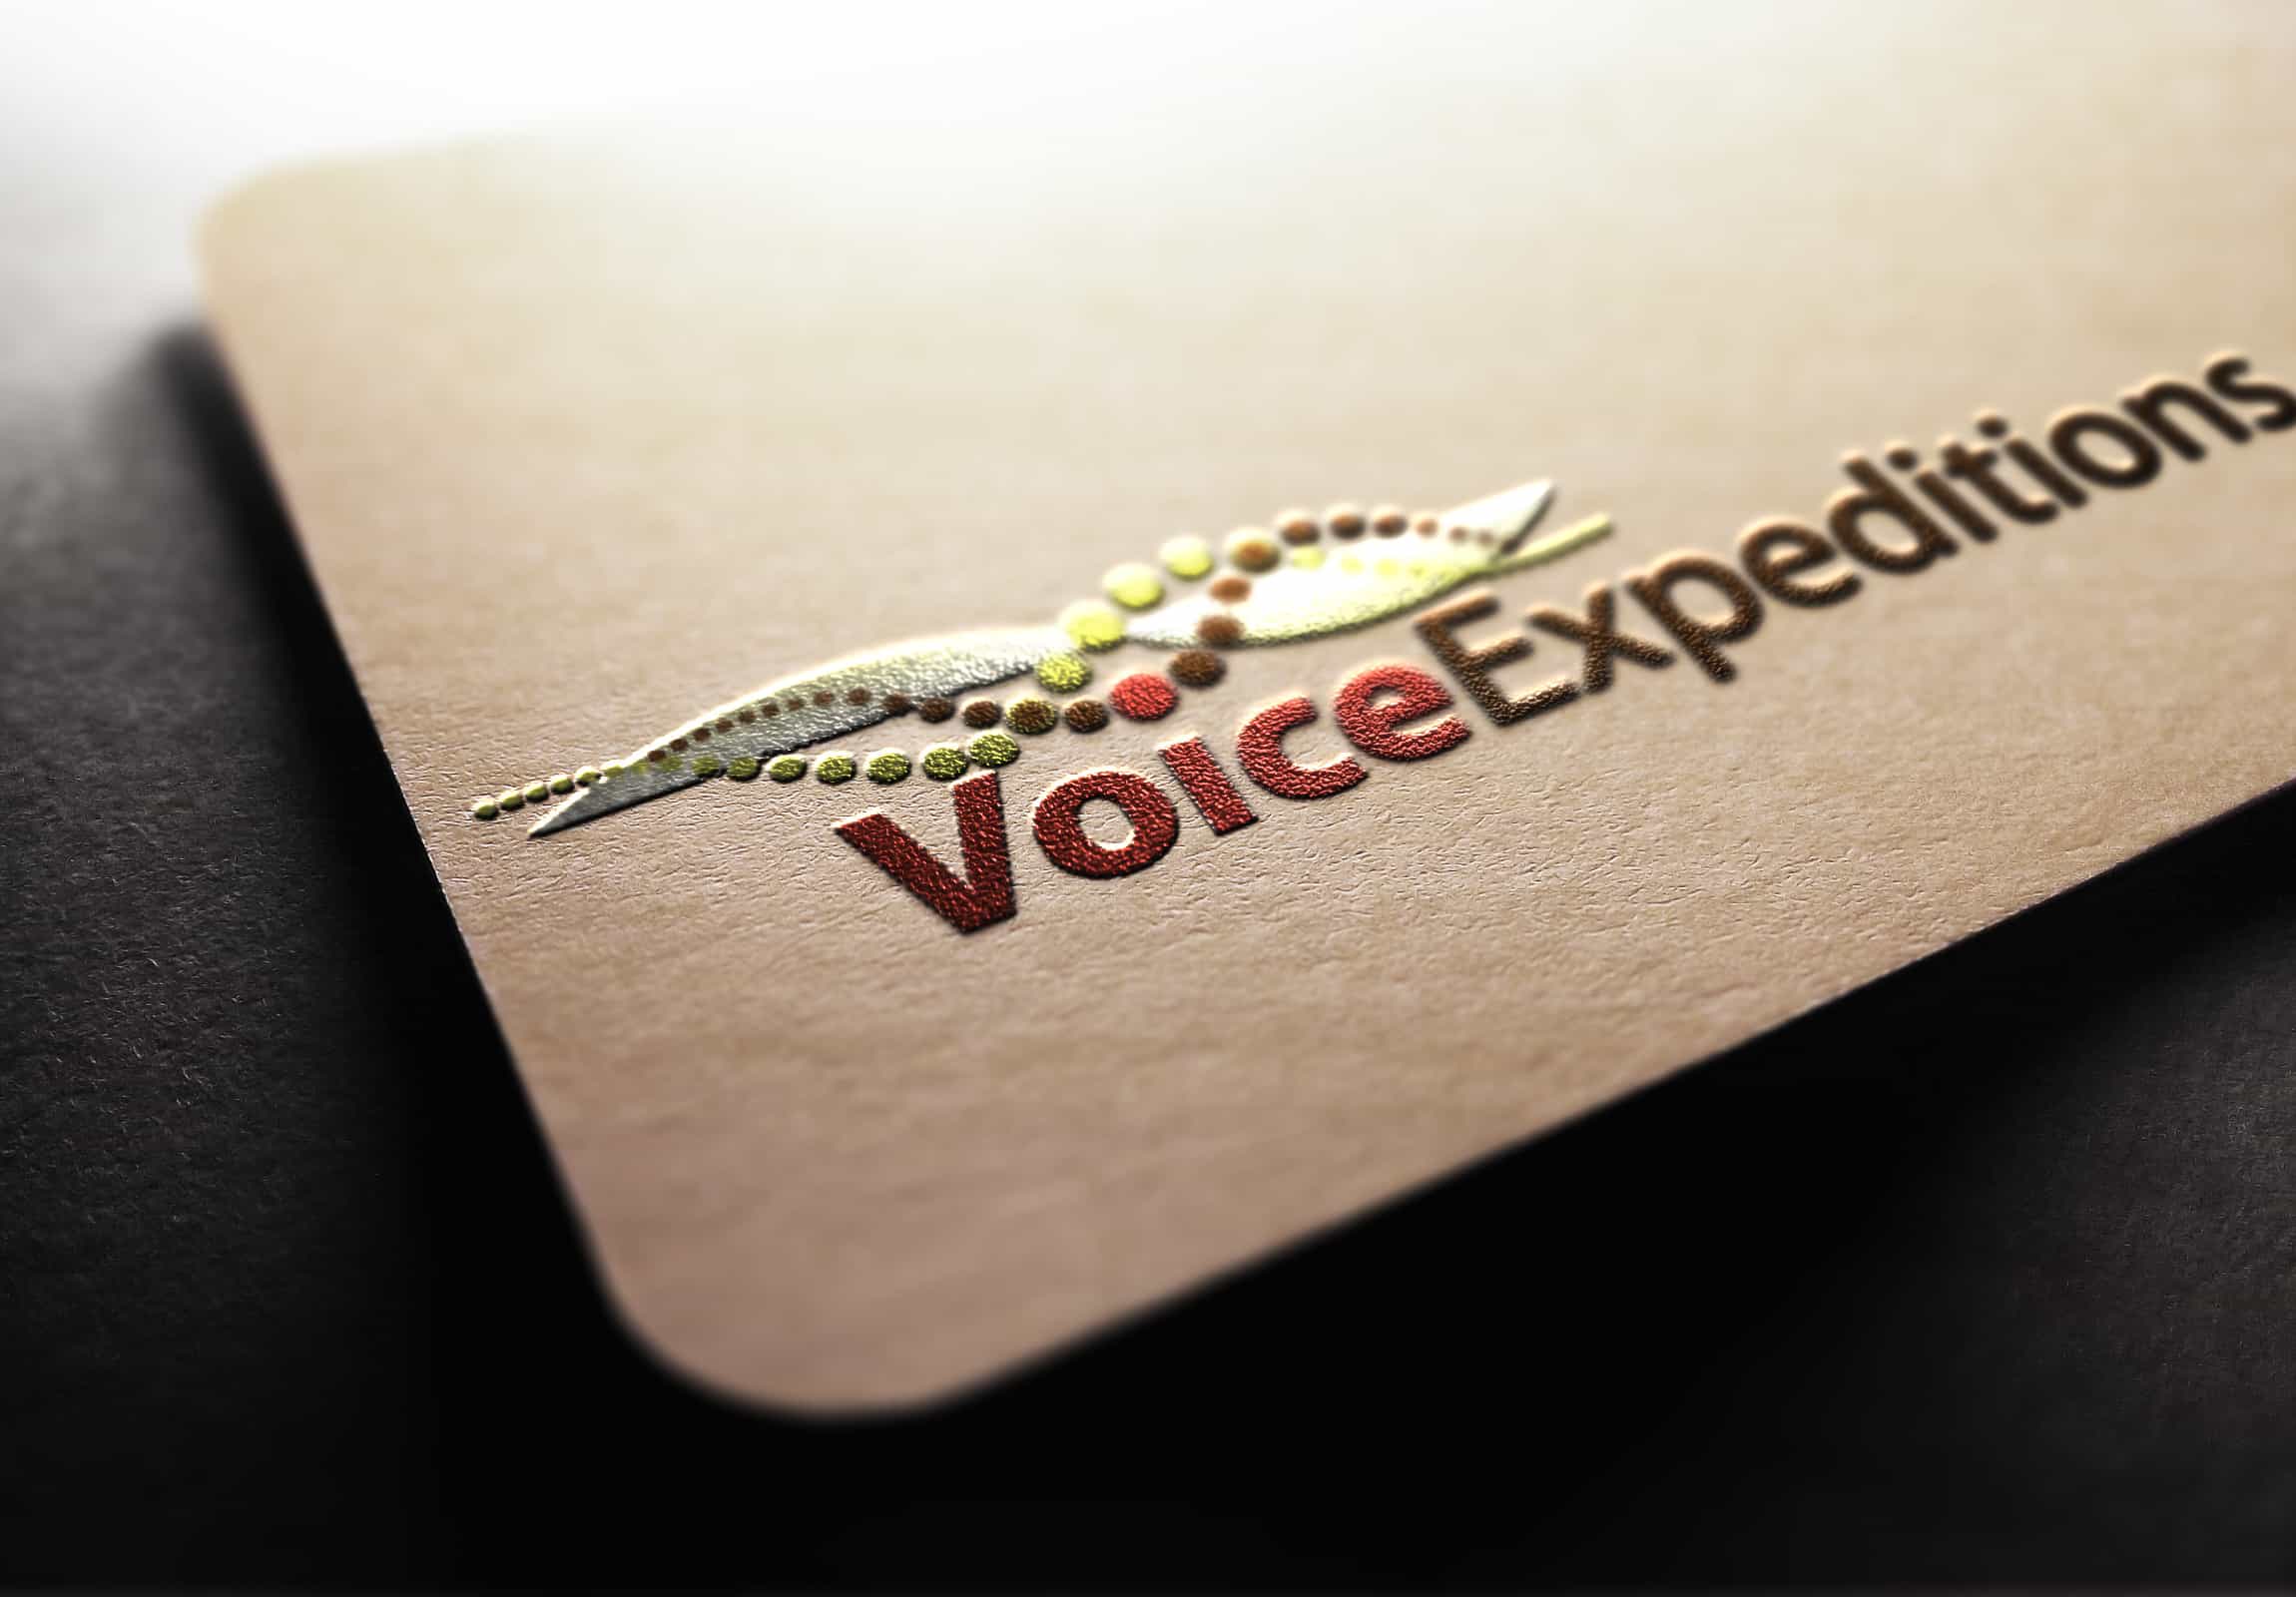 Voice Expeditions - Branding & Marketing